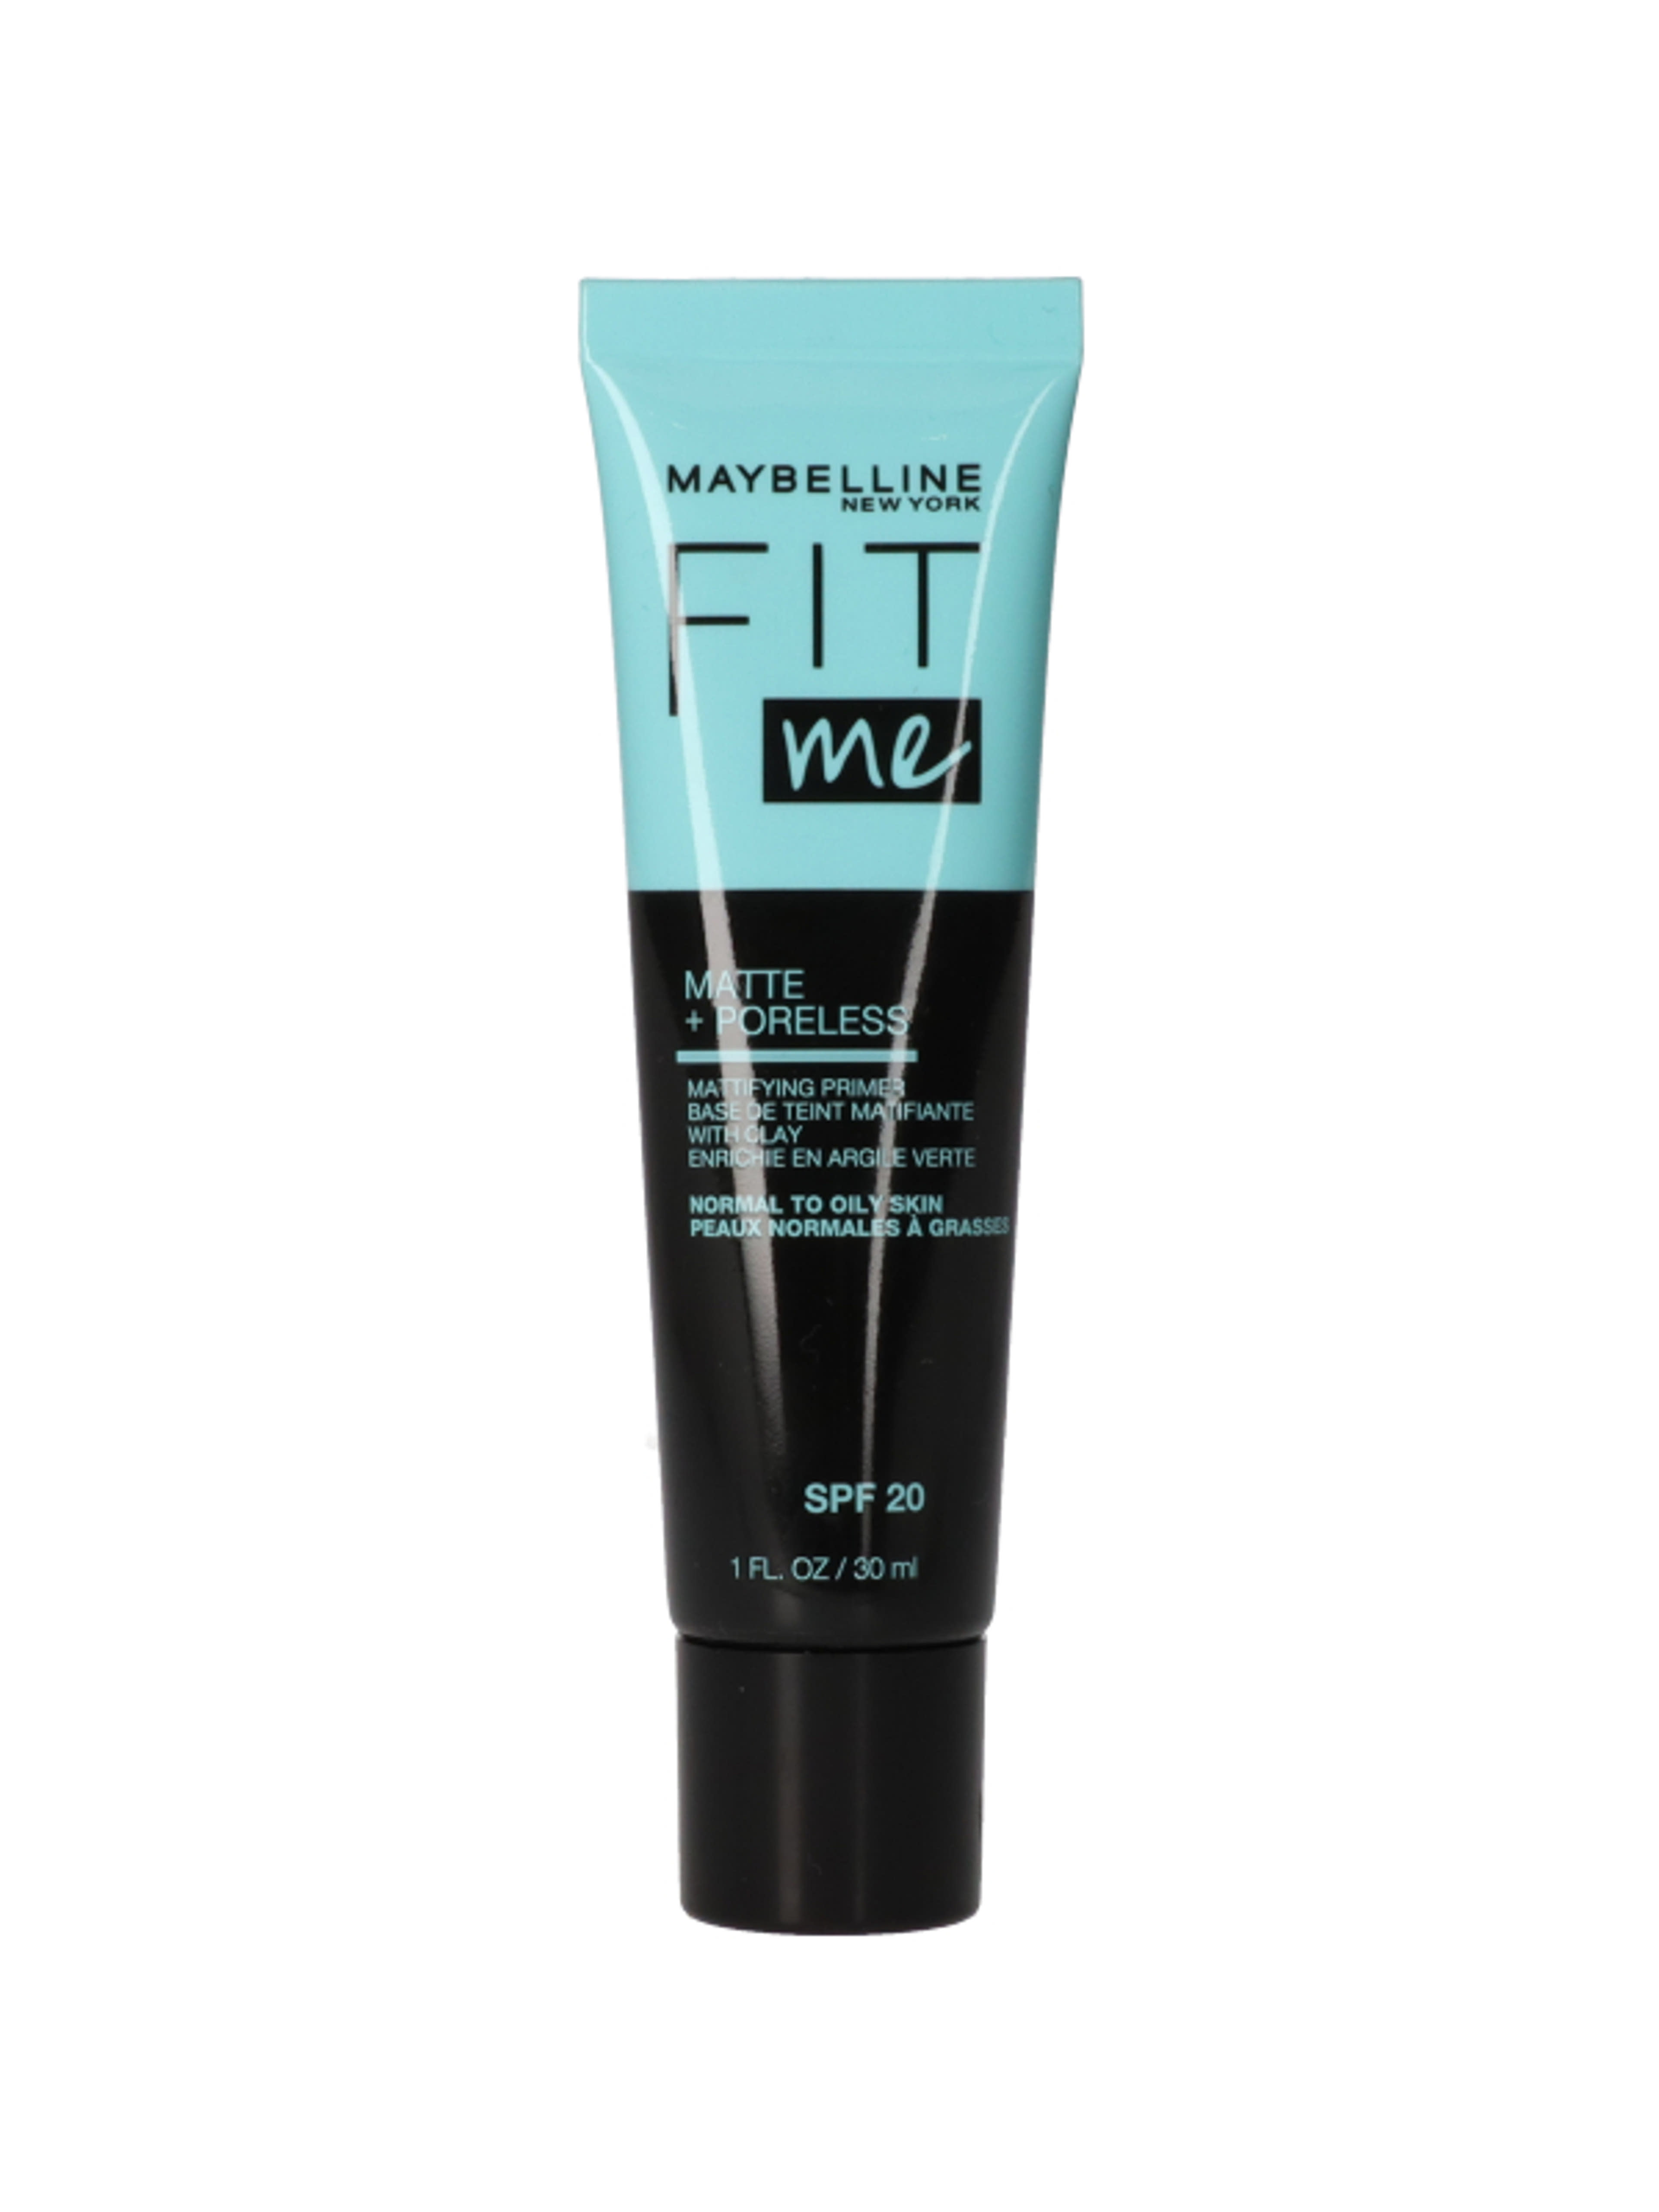 Maybelline Fit Me Matte and Poreless sminkalap - 1 db-1